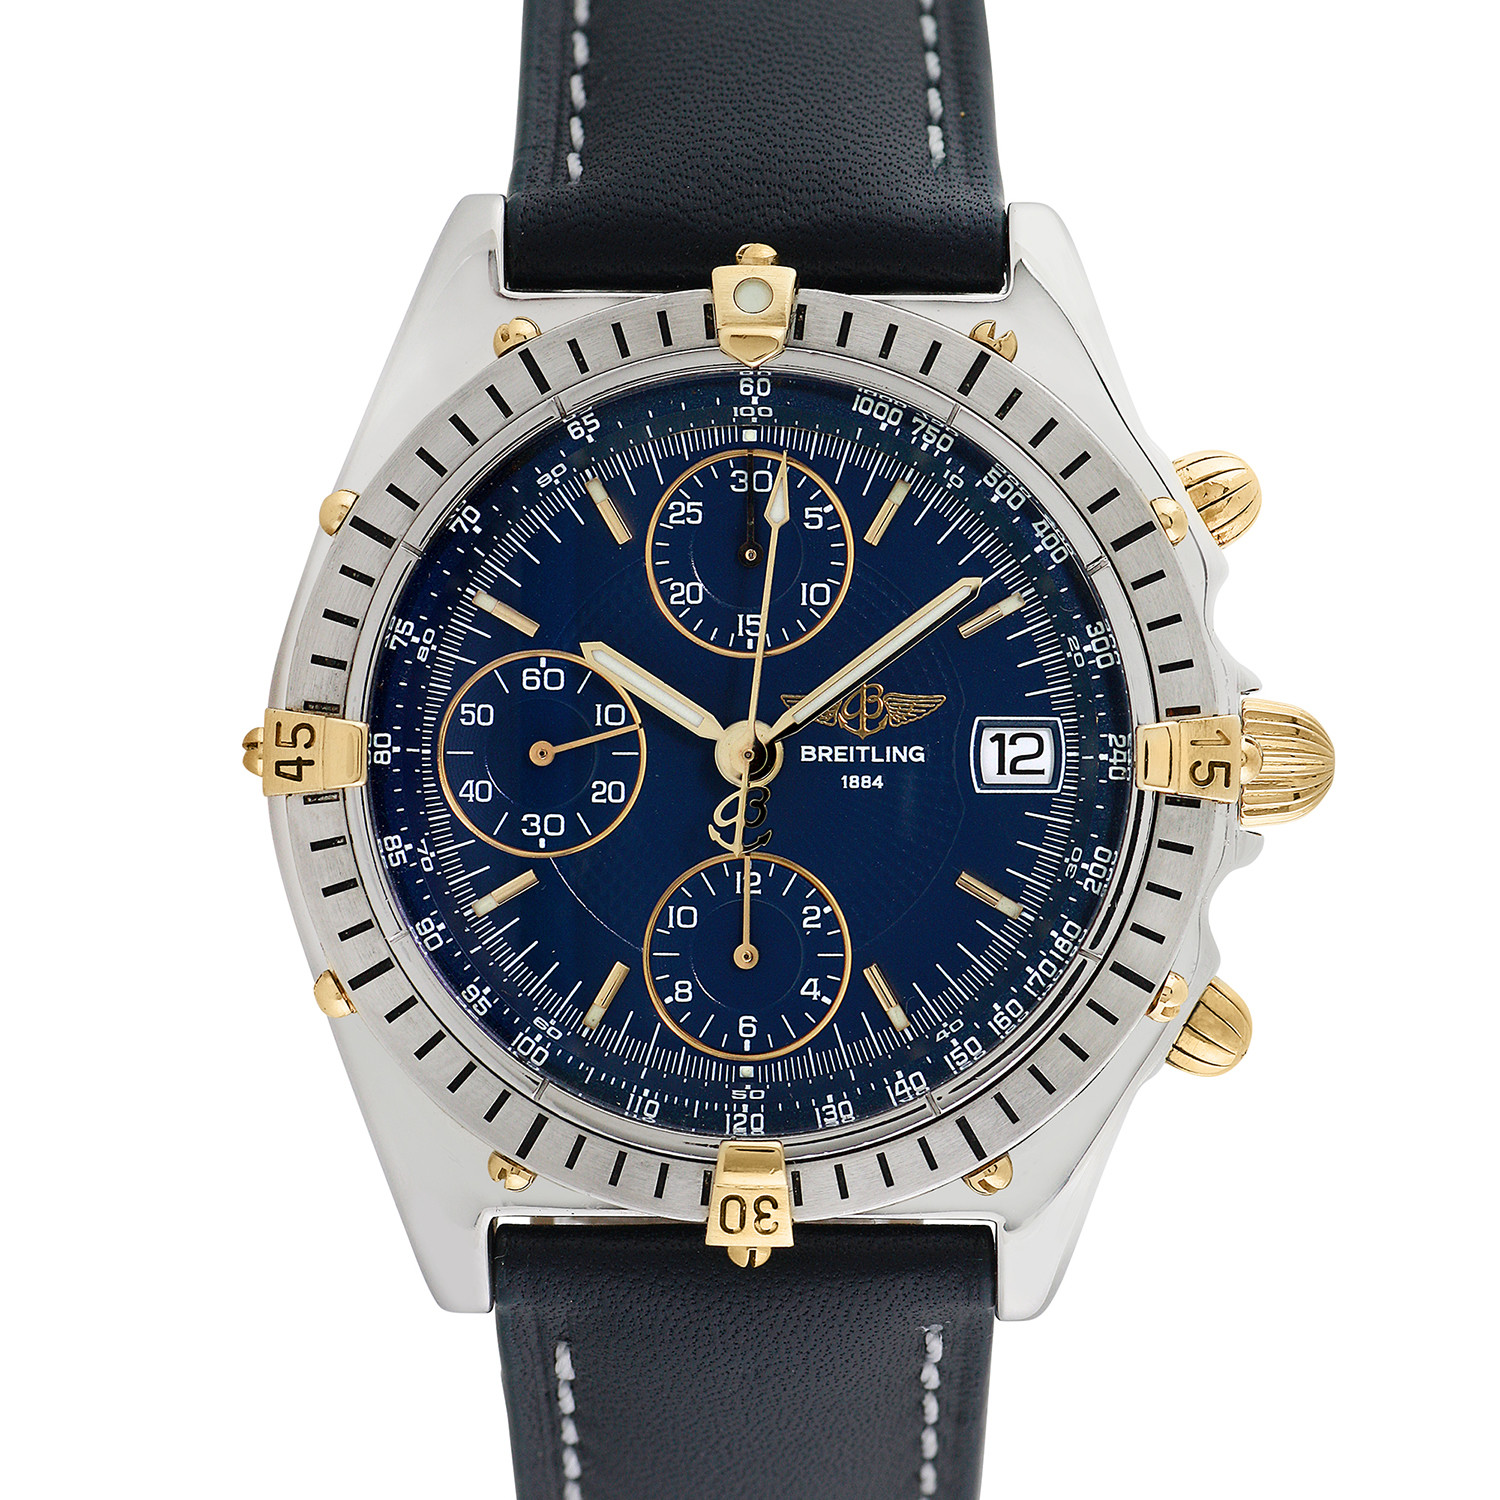 Breitling Chronomat Automatic // B13047 // 763-TM10414 // Pre-Owned ...